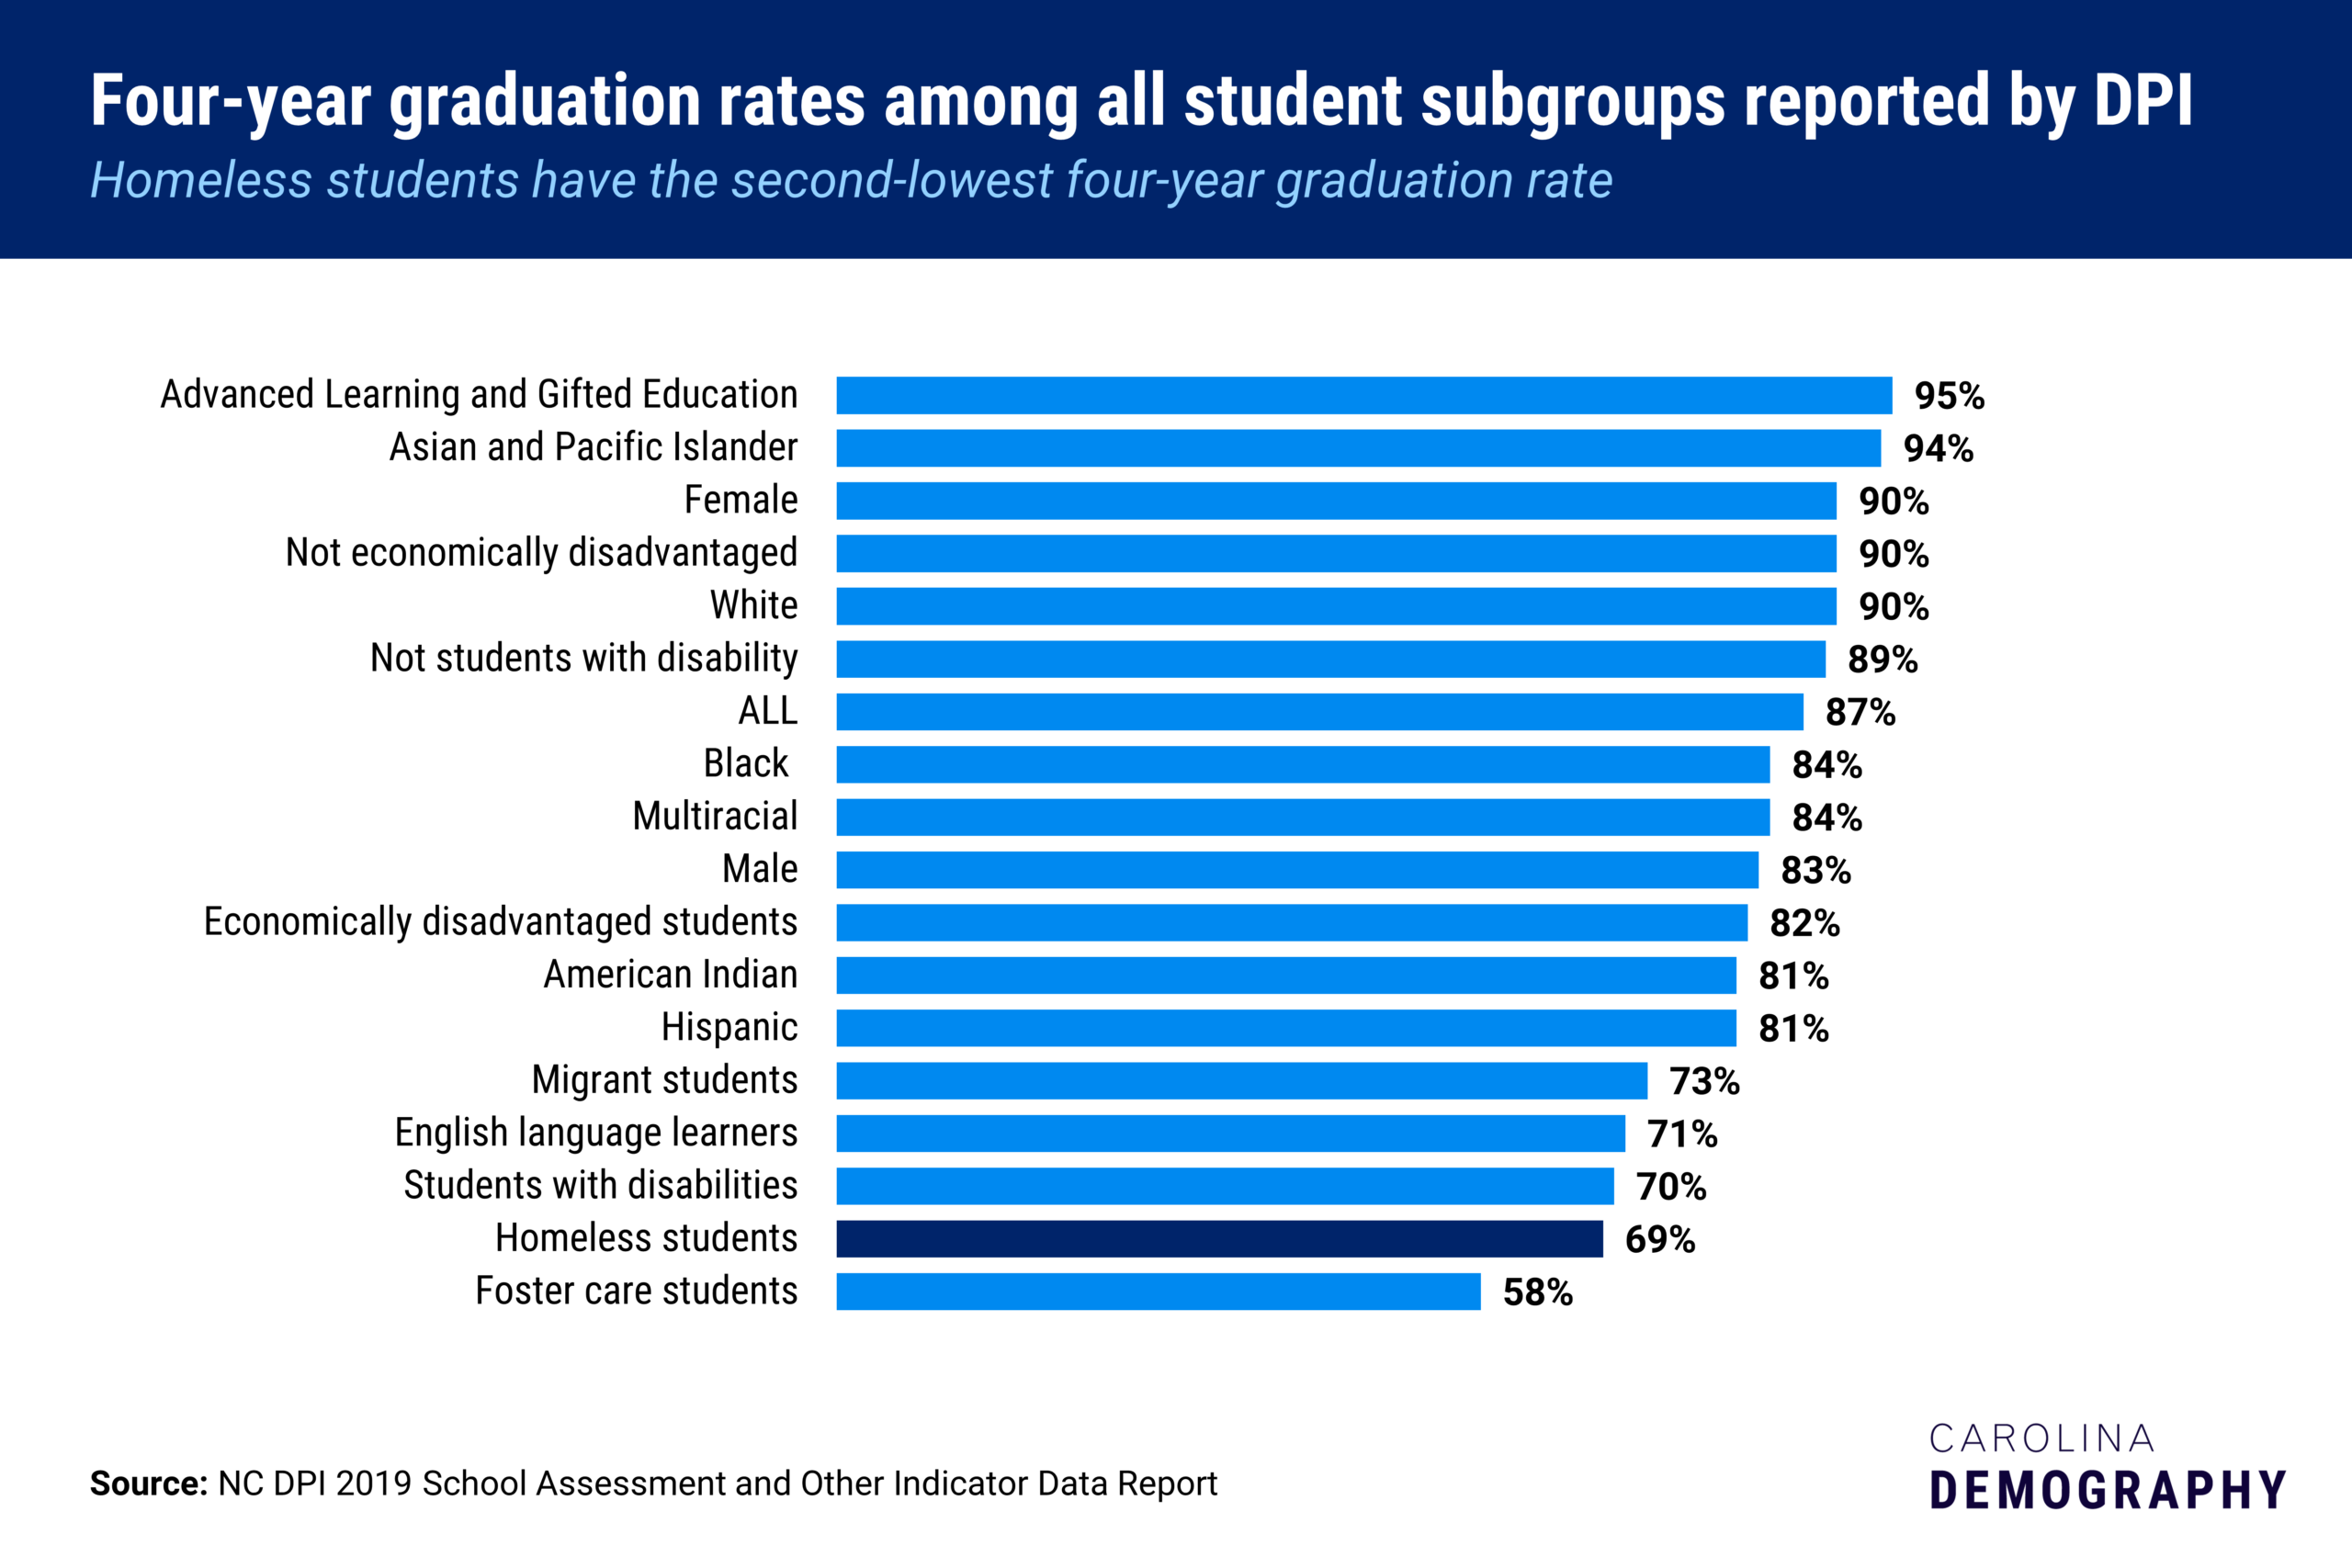 This chart shows the graduation rate of homeless students compared to other student subgroups in NC.